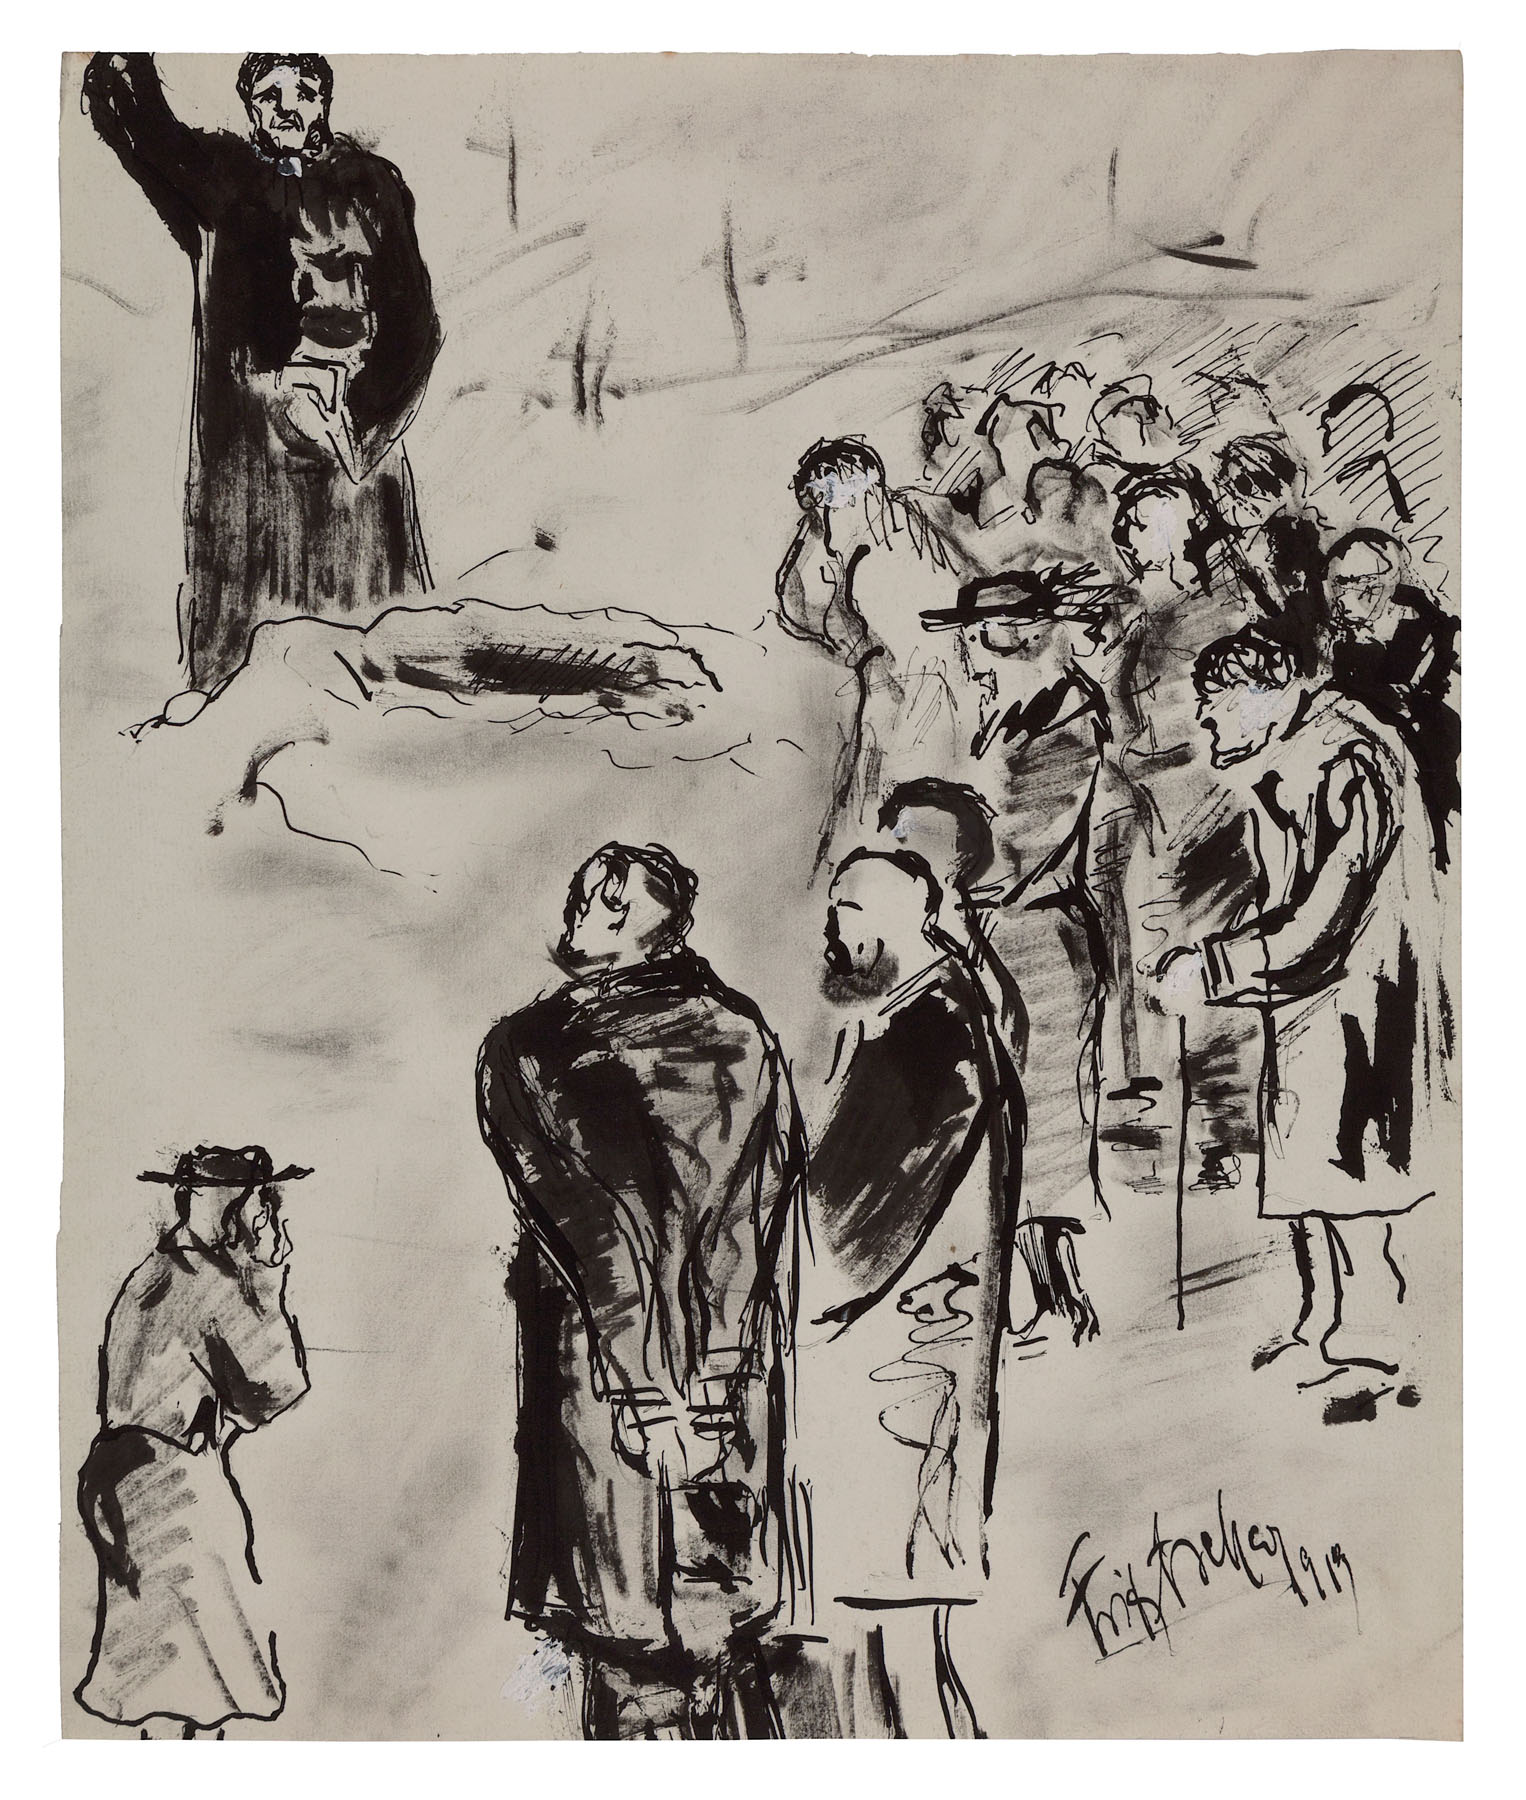 Fritz Ascher, Burial, 1919. White gouache over black ink on paper, 13.8 x 11.6 in. (35 x 29.5 cm). Signed and dated on lower right, "Fritz Ascher 1919". Private collection. Photo Malcolm Varon ©Bianca Stock